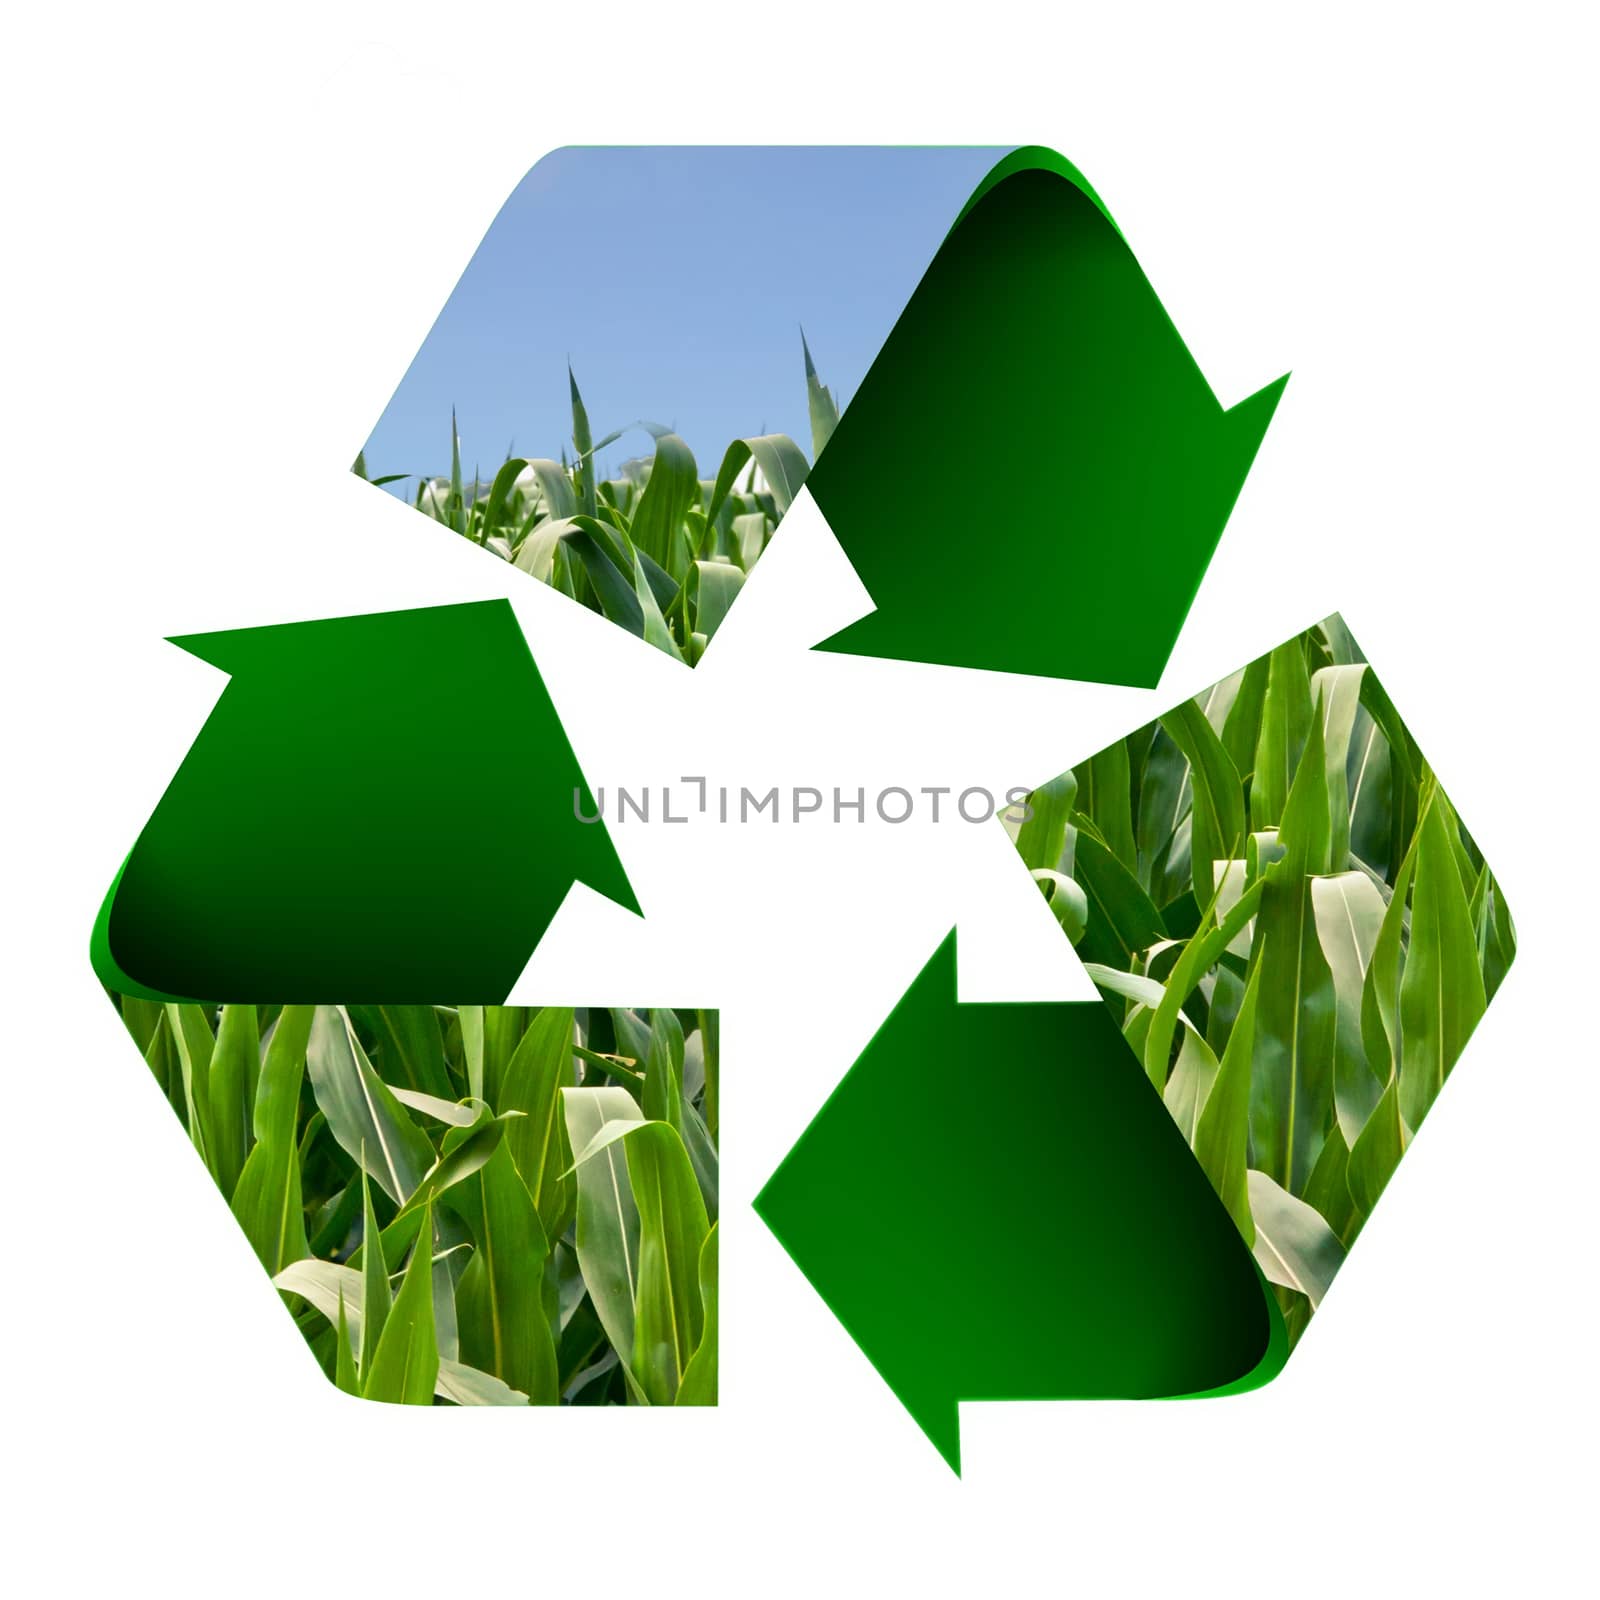 Cornfield superimposed onto a recycle symbol isolated on white.